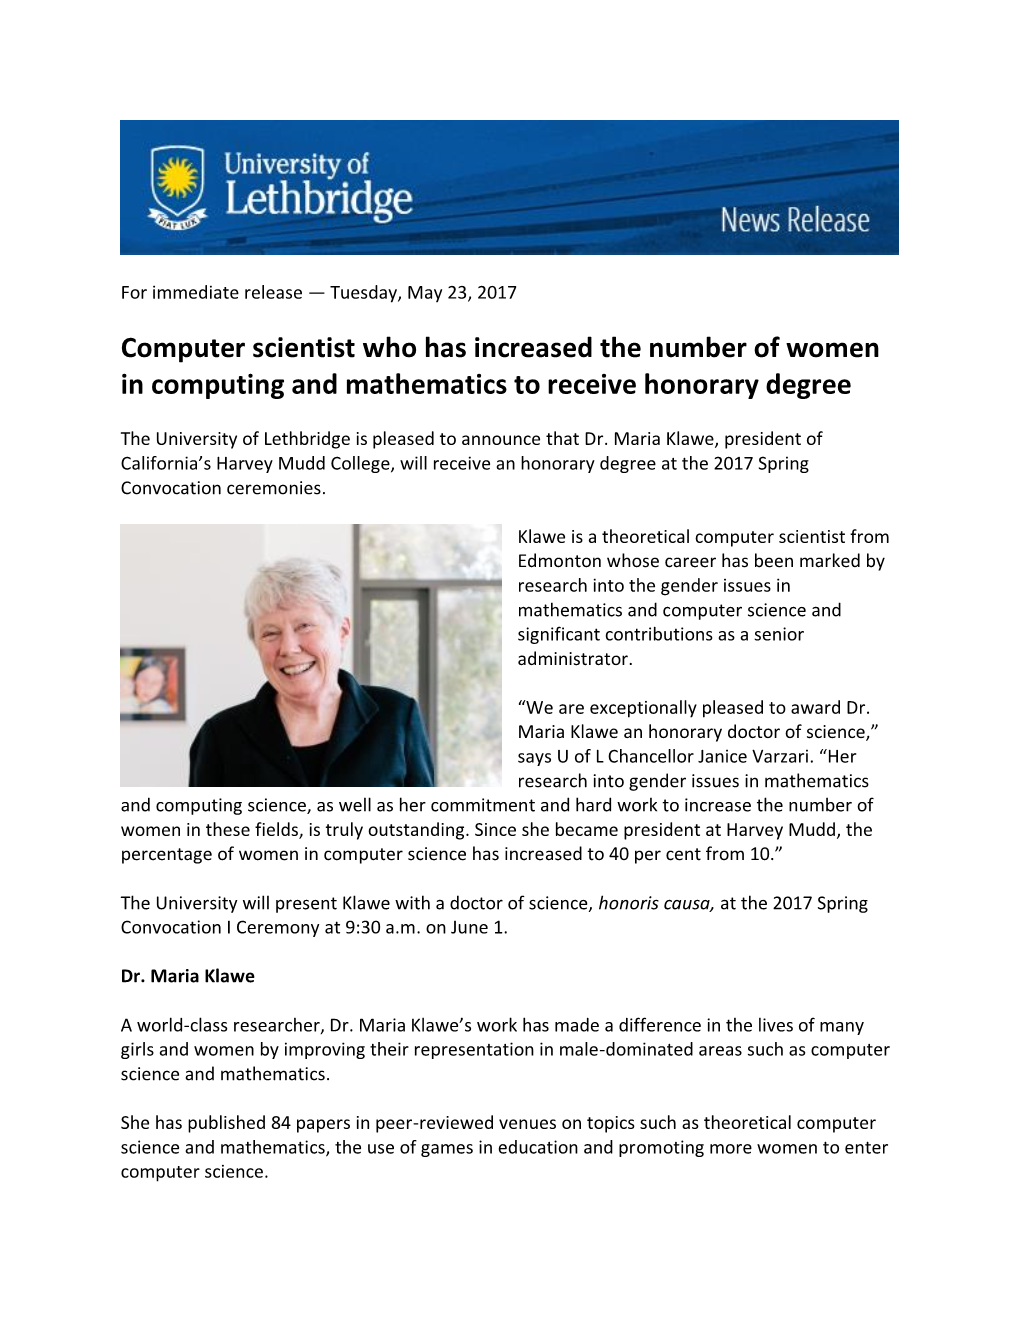 Computer Scientist Who Has Increased the Number of Women in Computing and Mathematics to Receive Honorary Degree